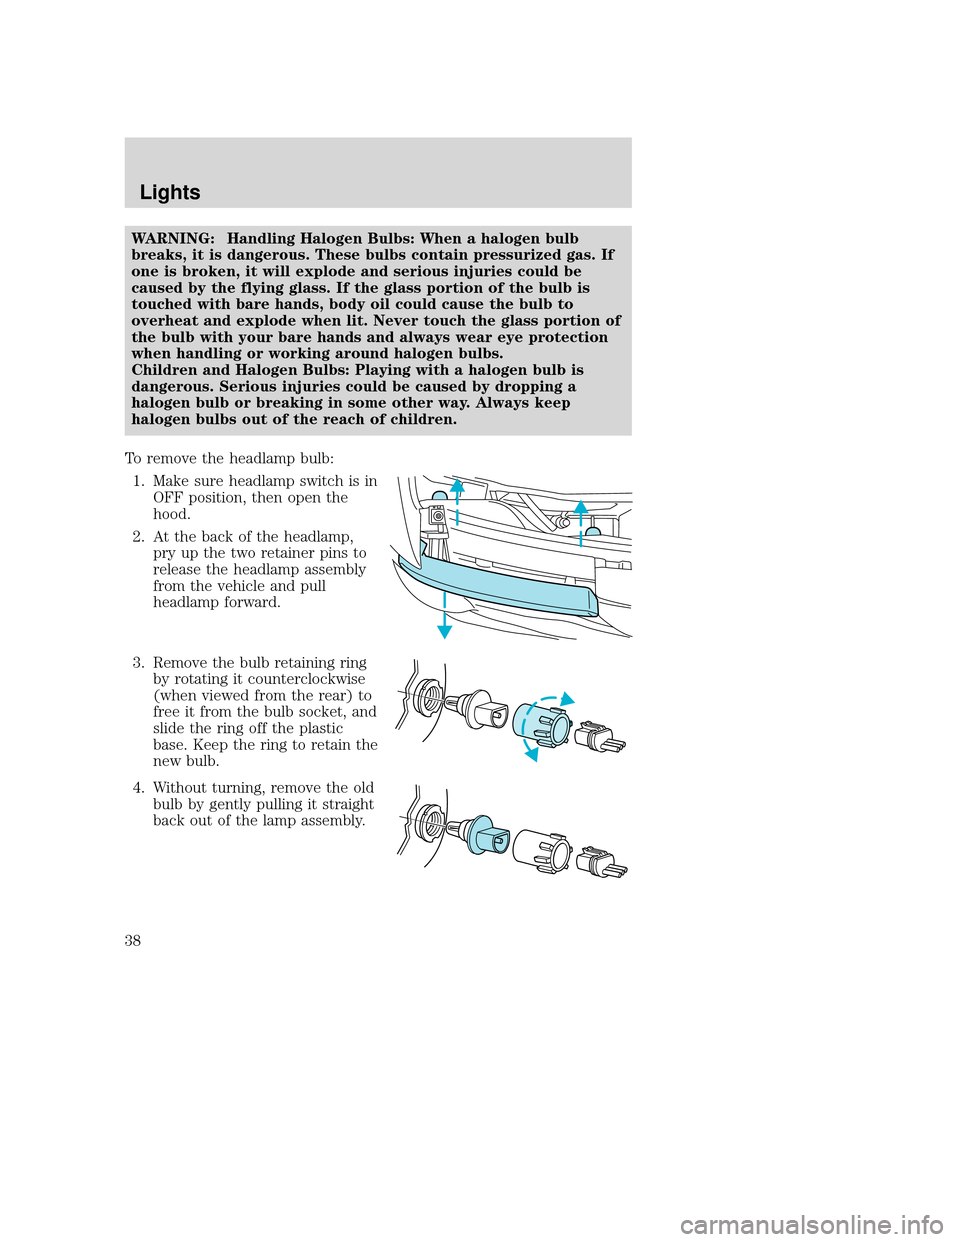 MAZDA MODEL B-SERIES 2004  Owners Manual (in English) WARNING: Handling Halogen Bulbs: When a halogen bulb
breaks, it is dangerous. These bulbs contain pressurized gas. If
one is broken, it will explode and serious injuries could be
caused by the flying 